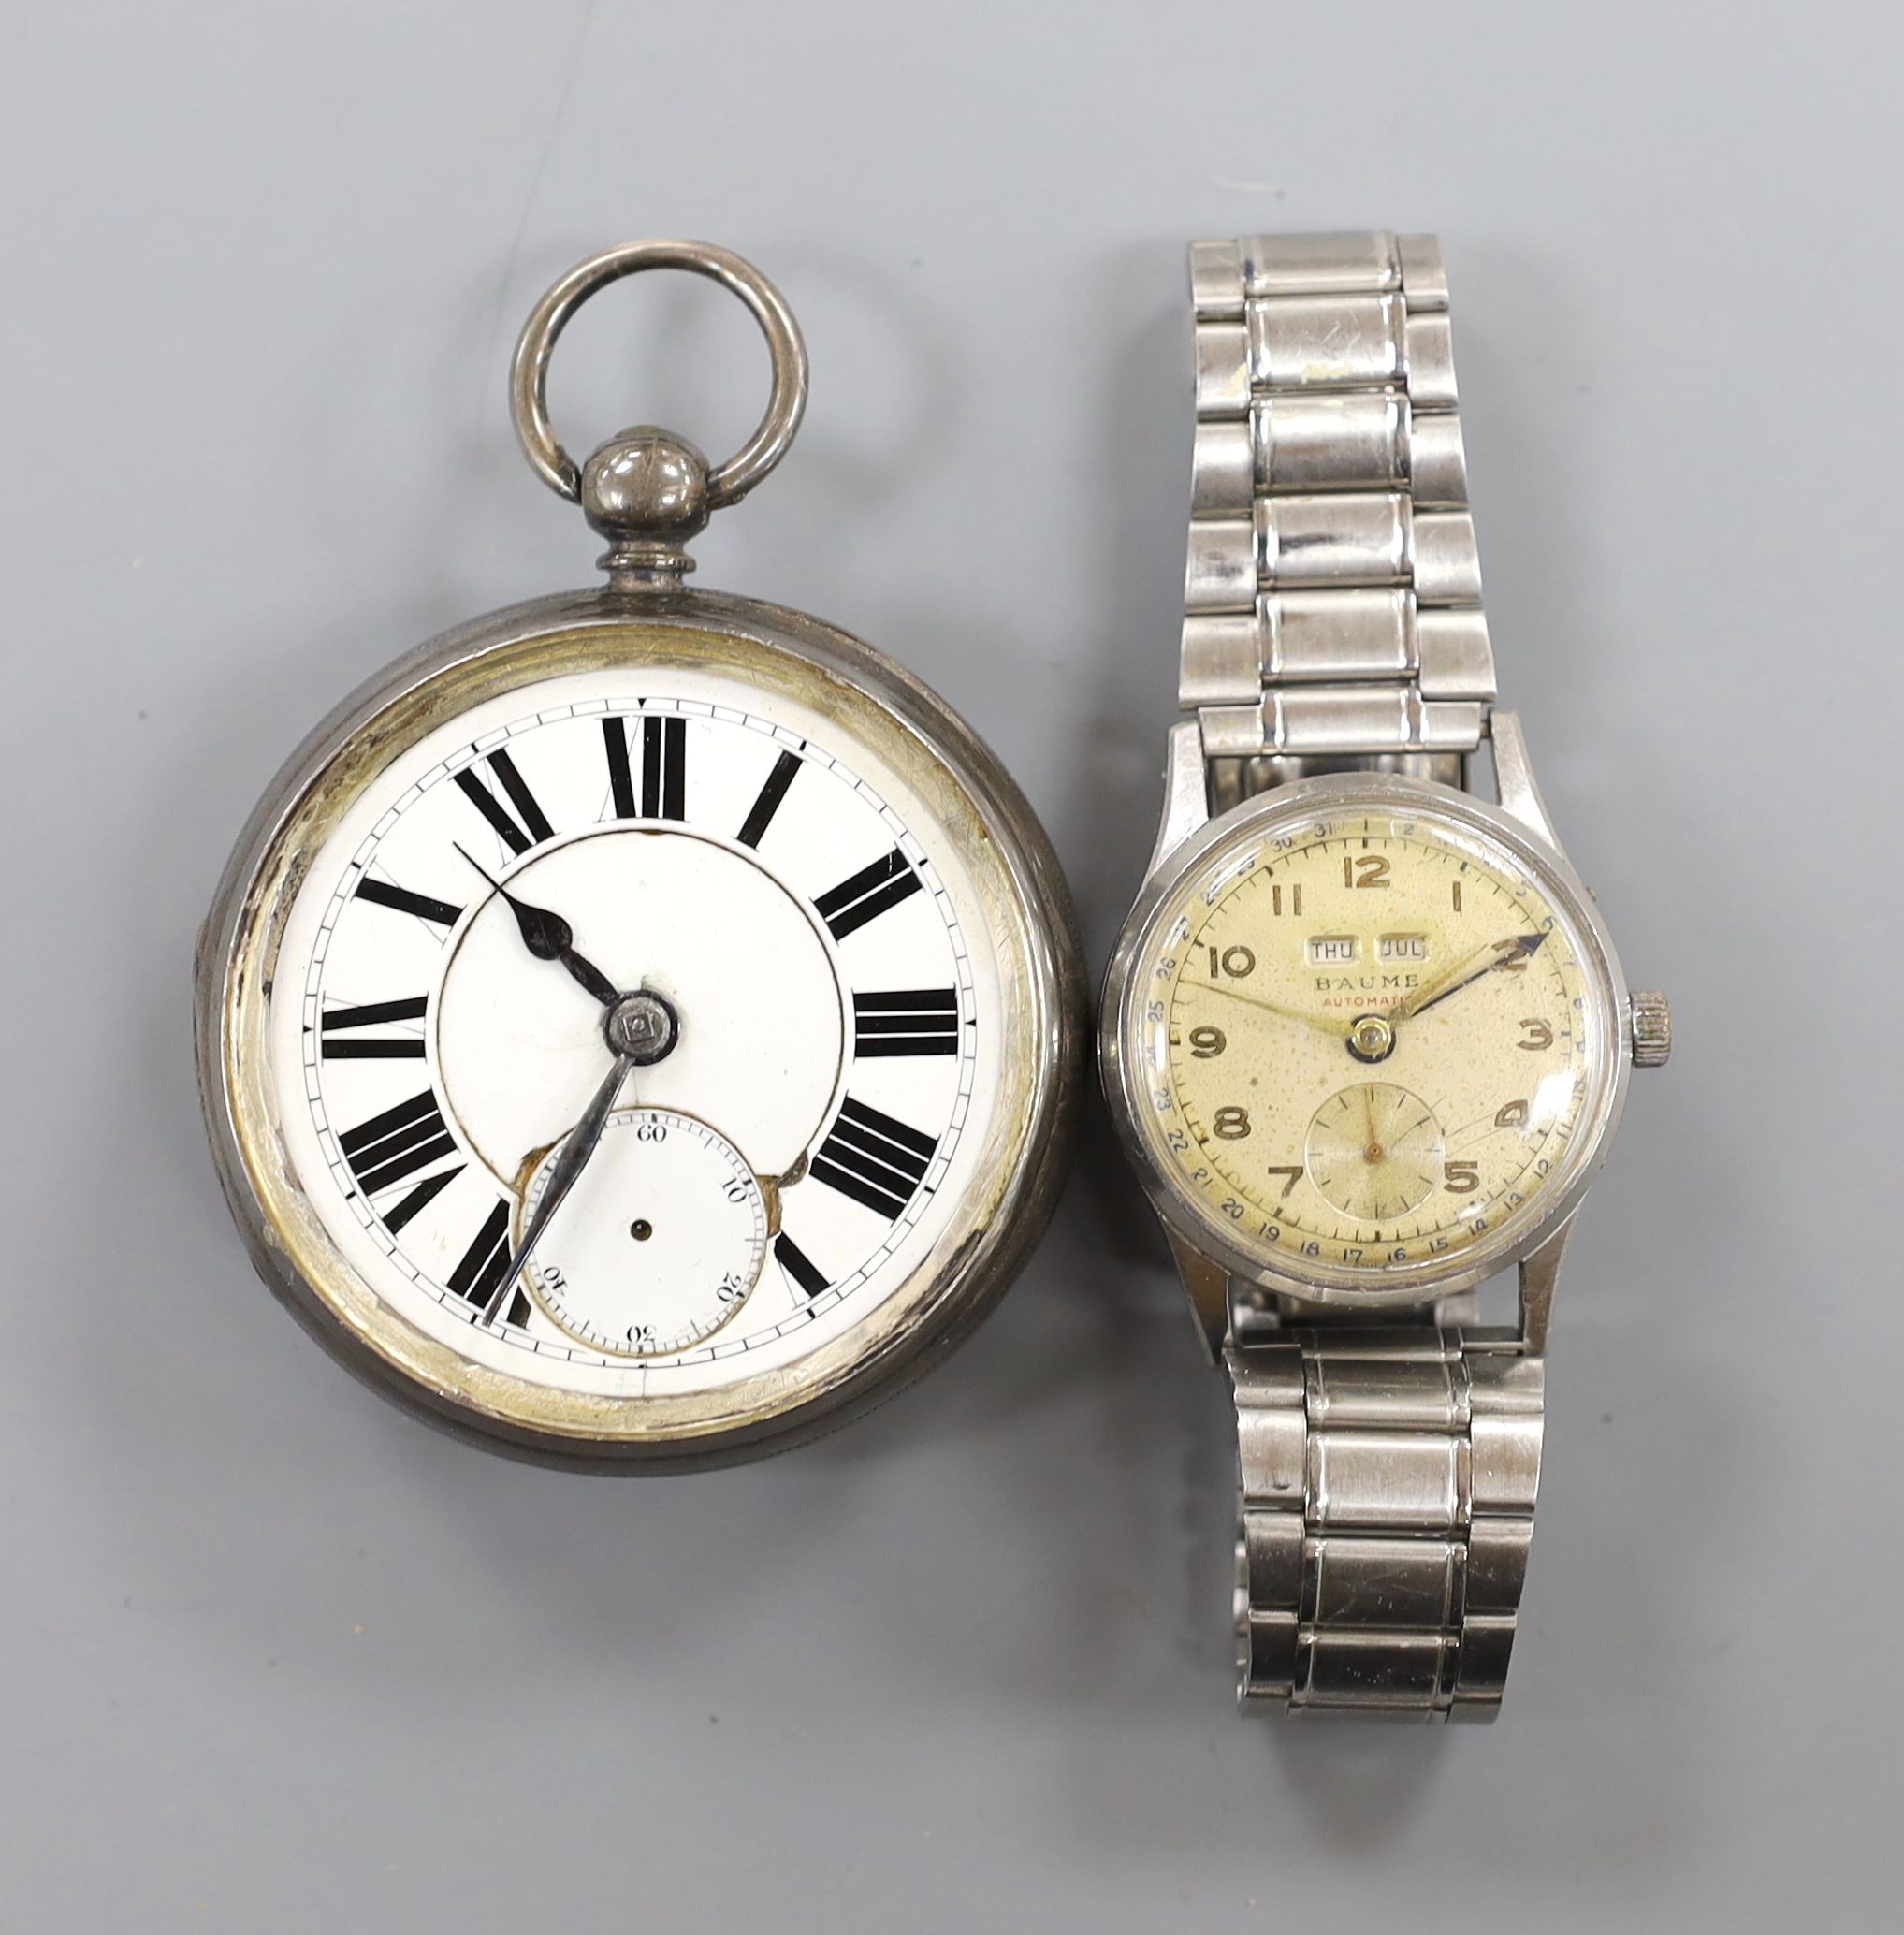 A gentleman's 1950's? stainless steel Baume automatic day/date wristwatch, on associated steel bracelet and a Victorian silver pocket watch.